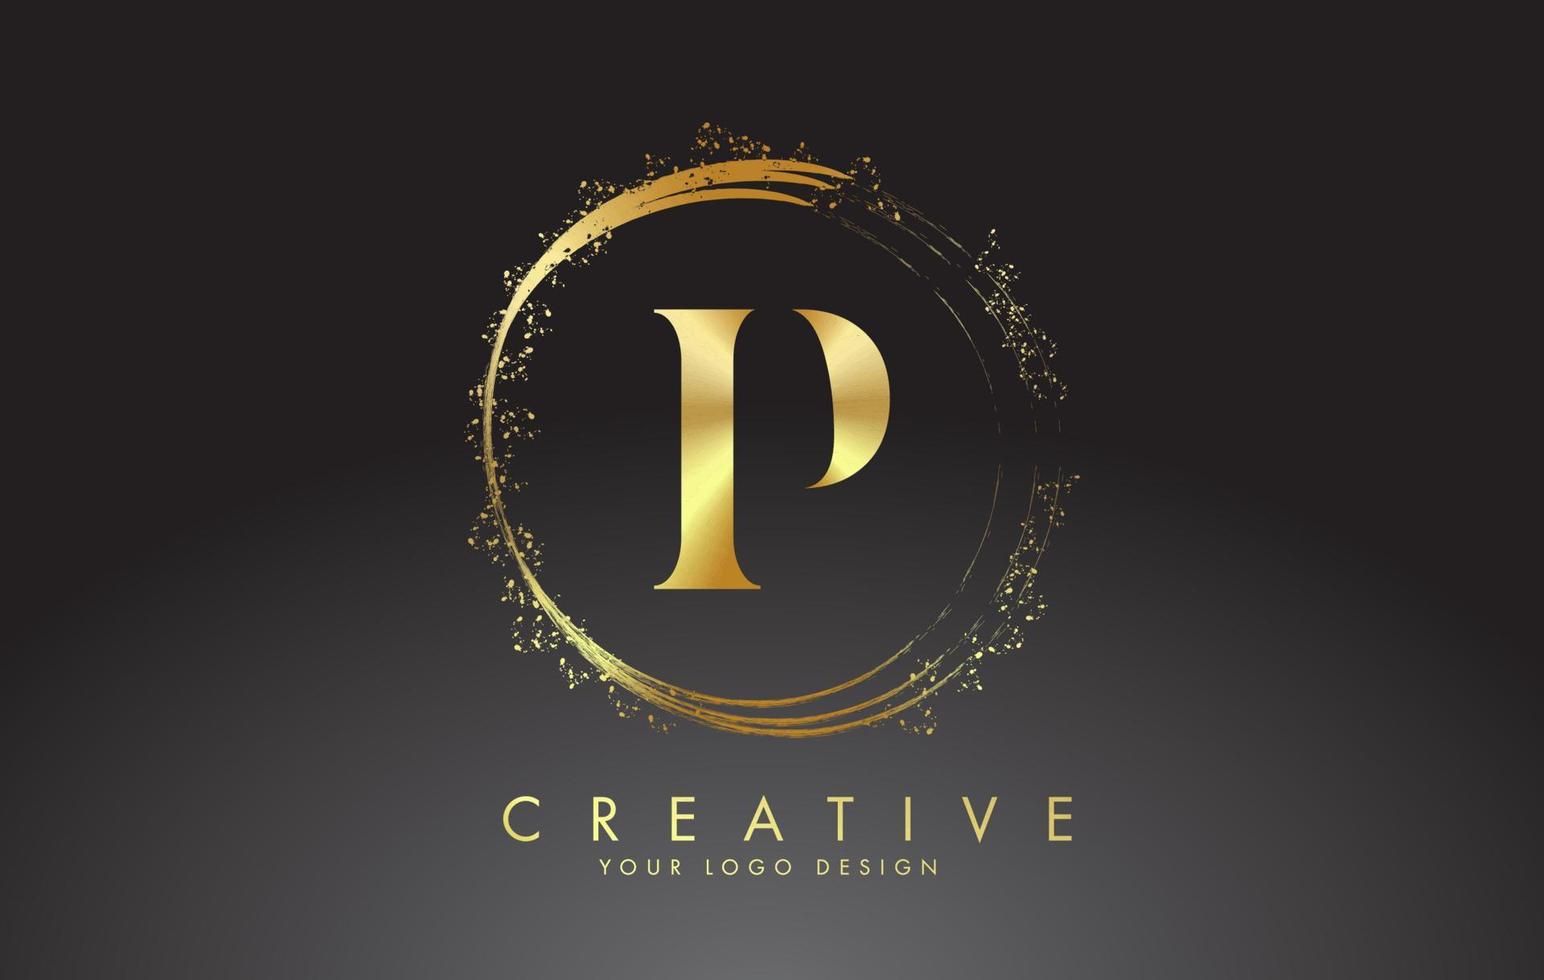 P golden letter logo with golden sparkling rings and dust glitter on a black background. Luxury decorative shiny vector illustration.